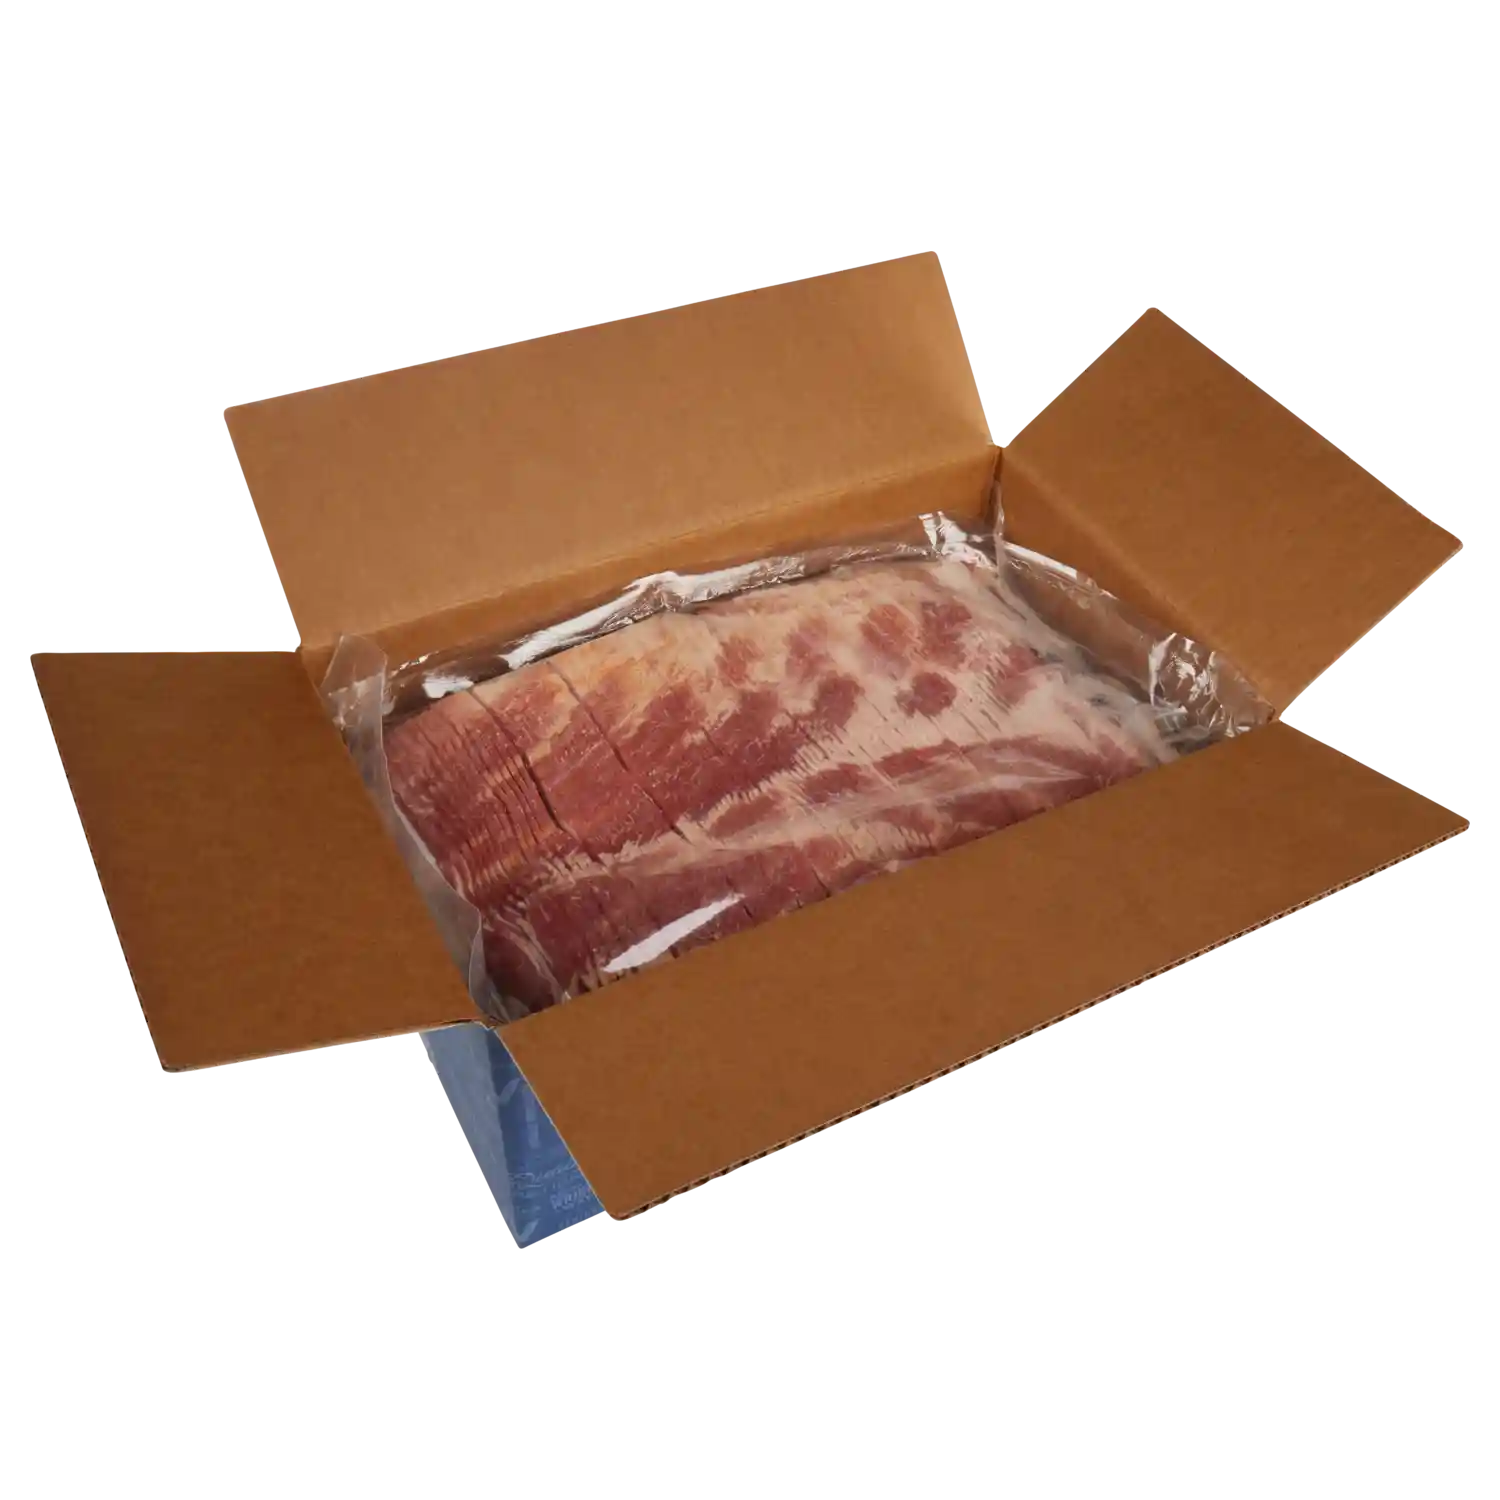 Wright® Brand Naturally Smoked Regular Sliced Bacon, Bulk, 30 Lbs, 14-18 Slices per Pound, Gas Flushed_image_31